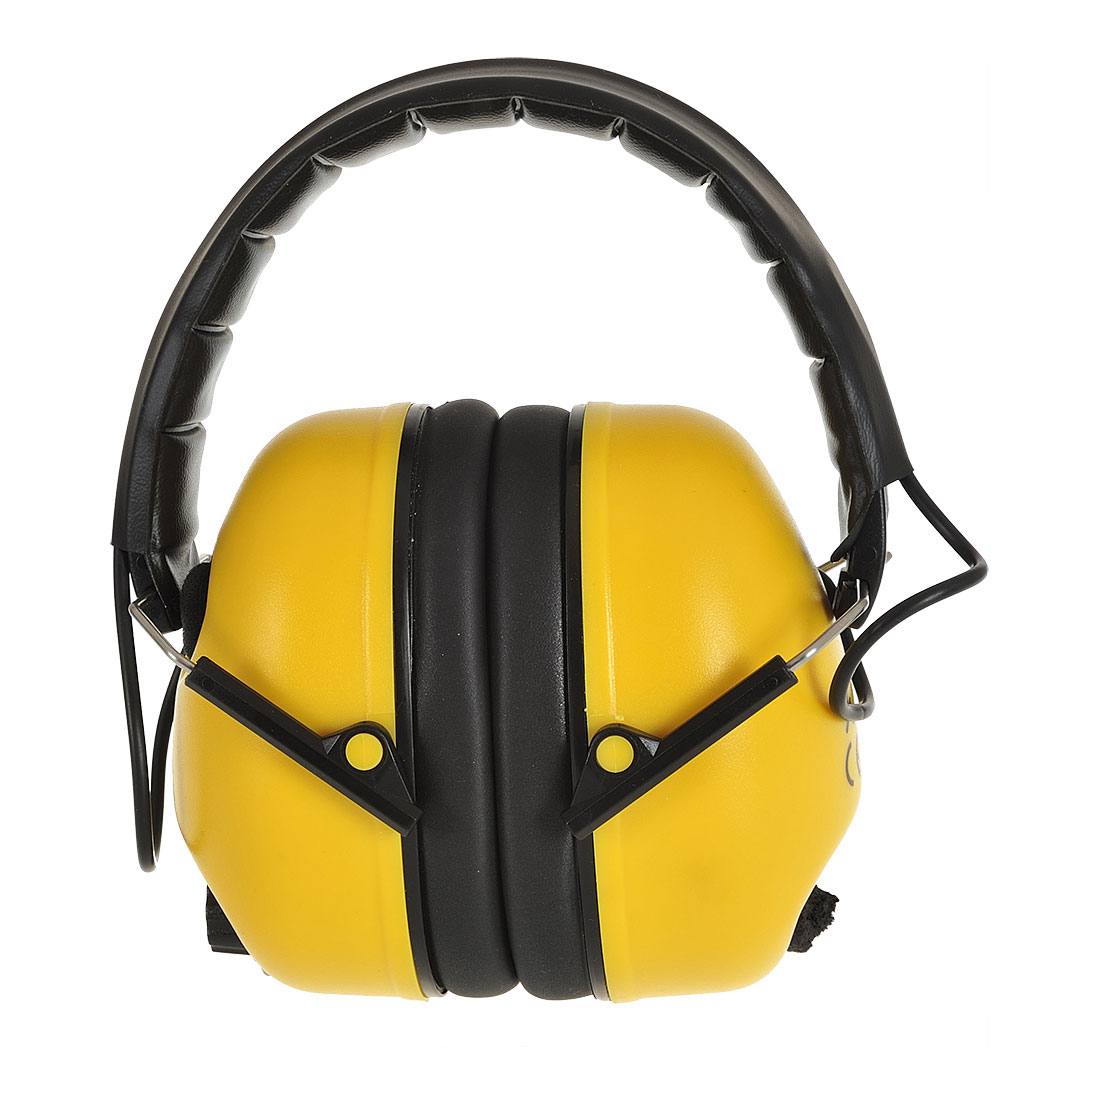 Portwest Comfort Ear Protector Safety Muffs Plugs Protection Work Wear PW43